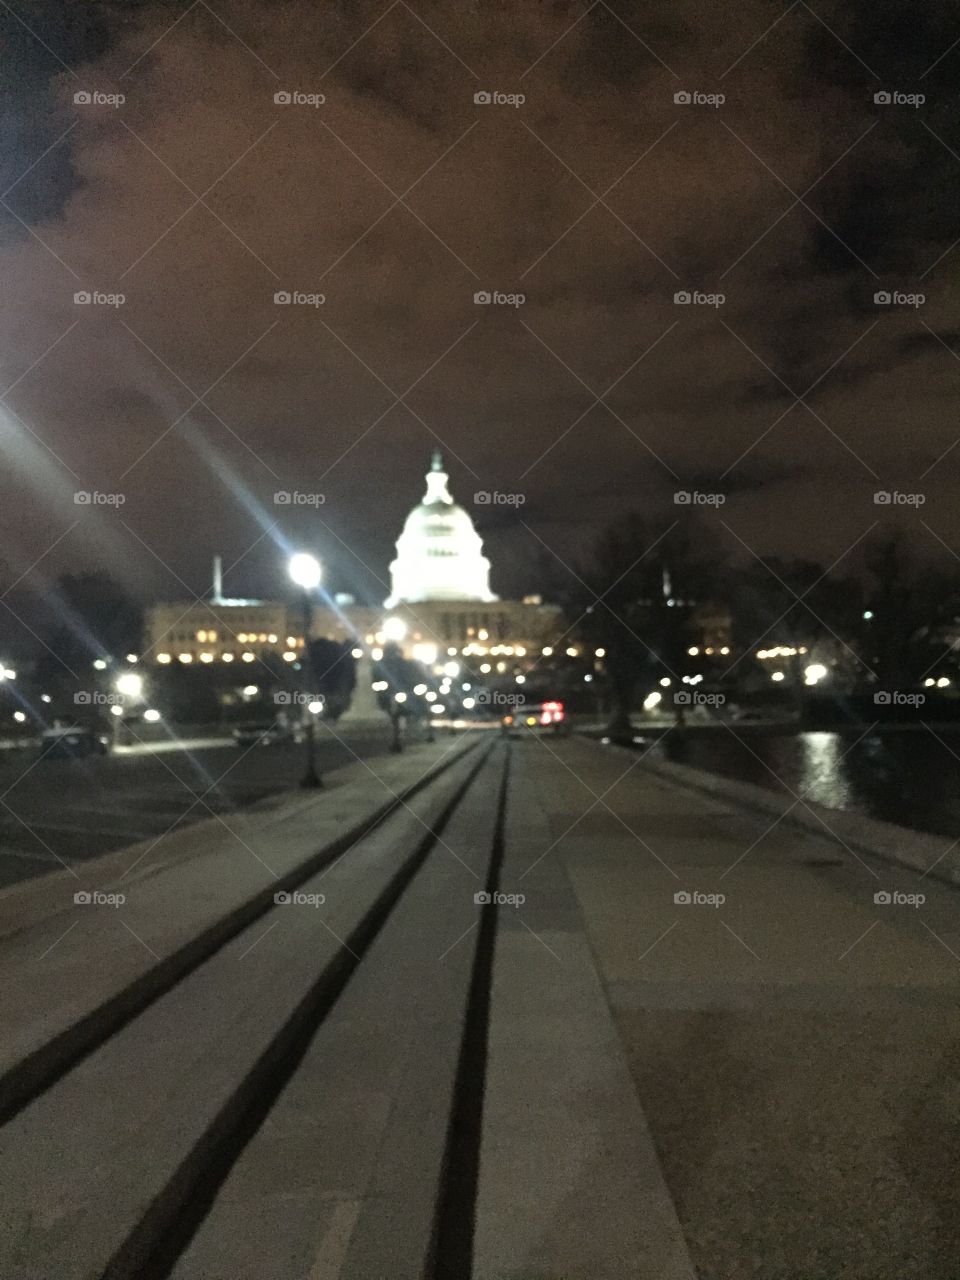 A blurry look at the nation's capitol; Washington has many blurred lines...